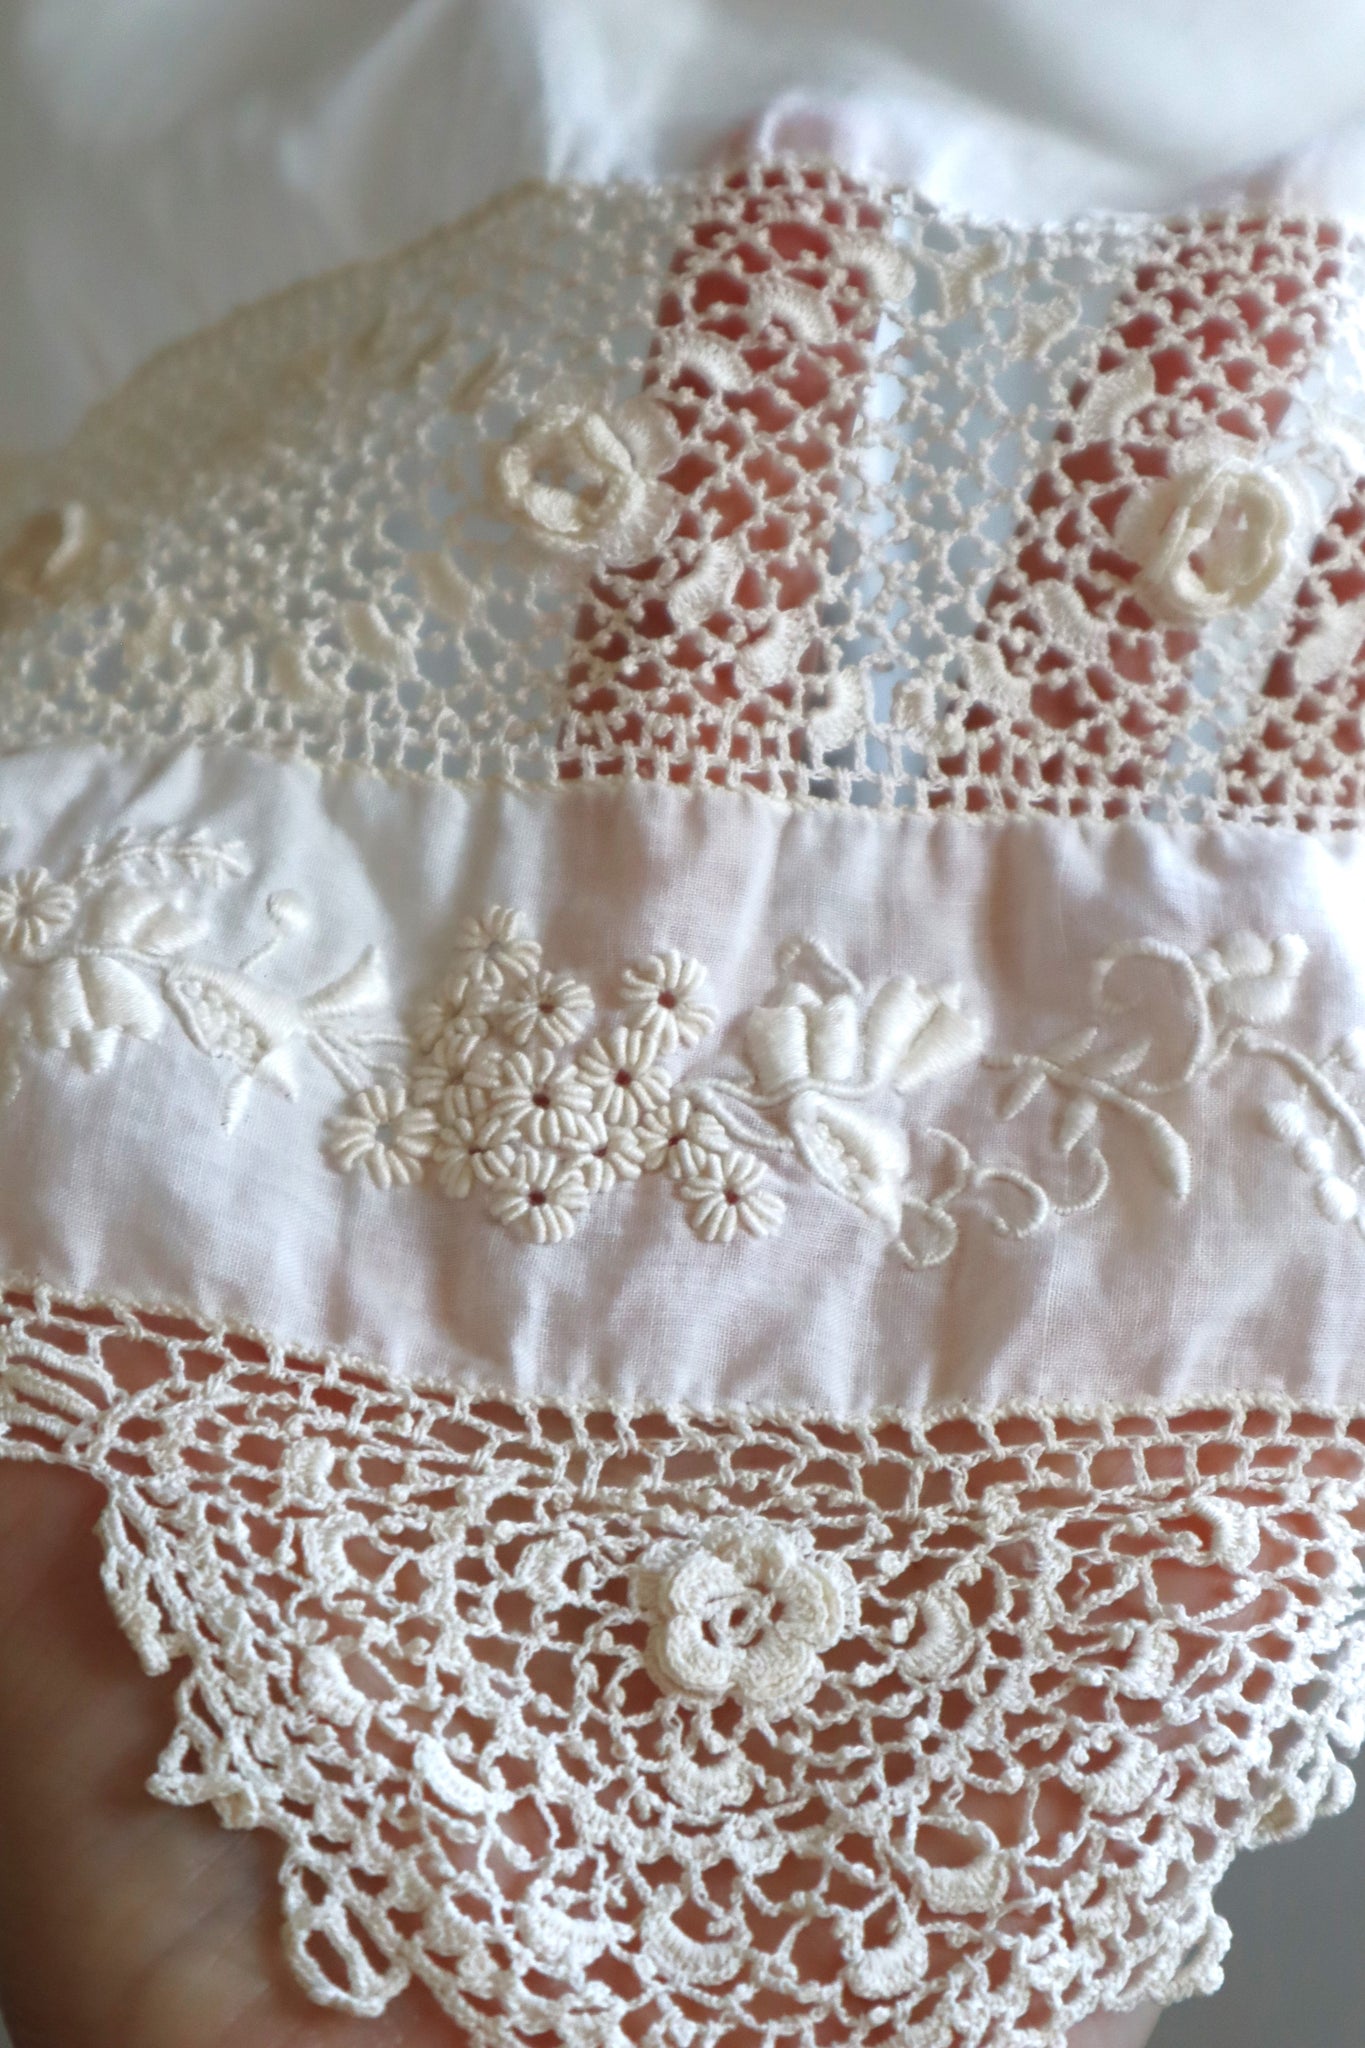 1910s Hand Embroidered Lace Lingerie